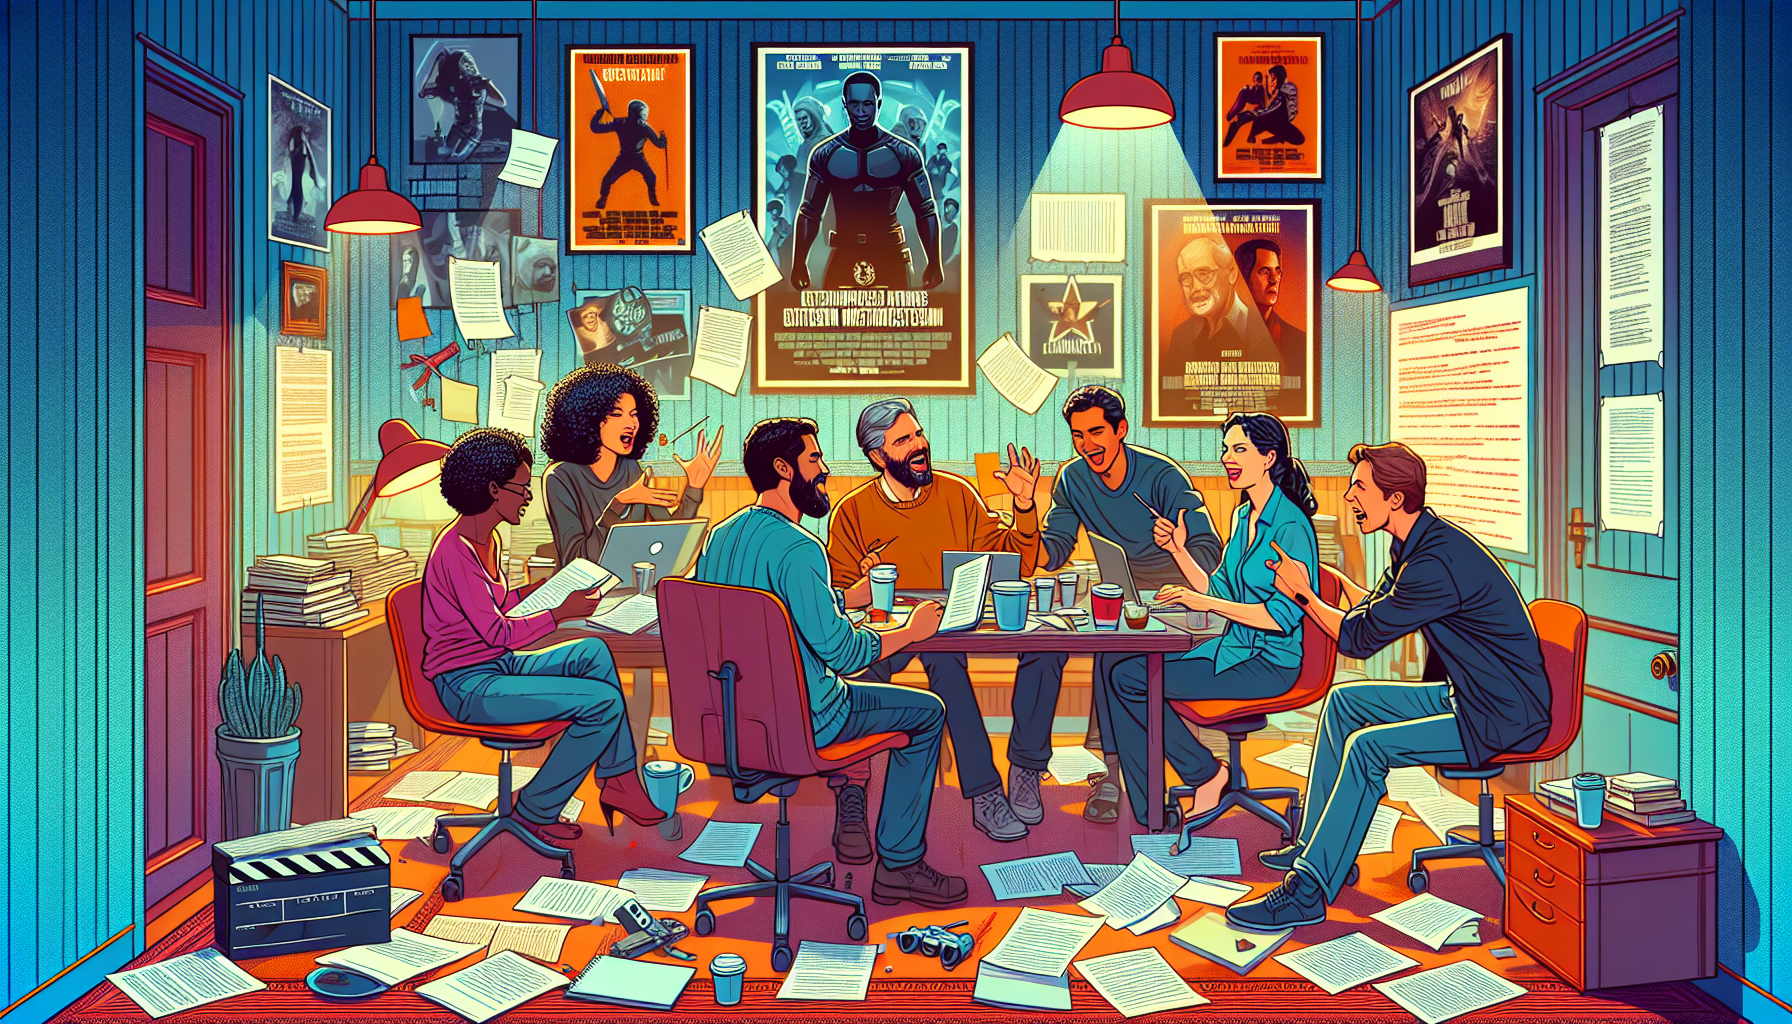 An intense brainstorming session in a cozy, dimly-lit writer's room, with a diverse group of screenwriters passionately discussing ideas around a cluttered table filled with scripts, laptops, and coff